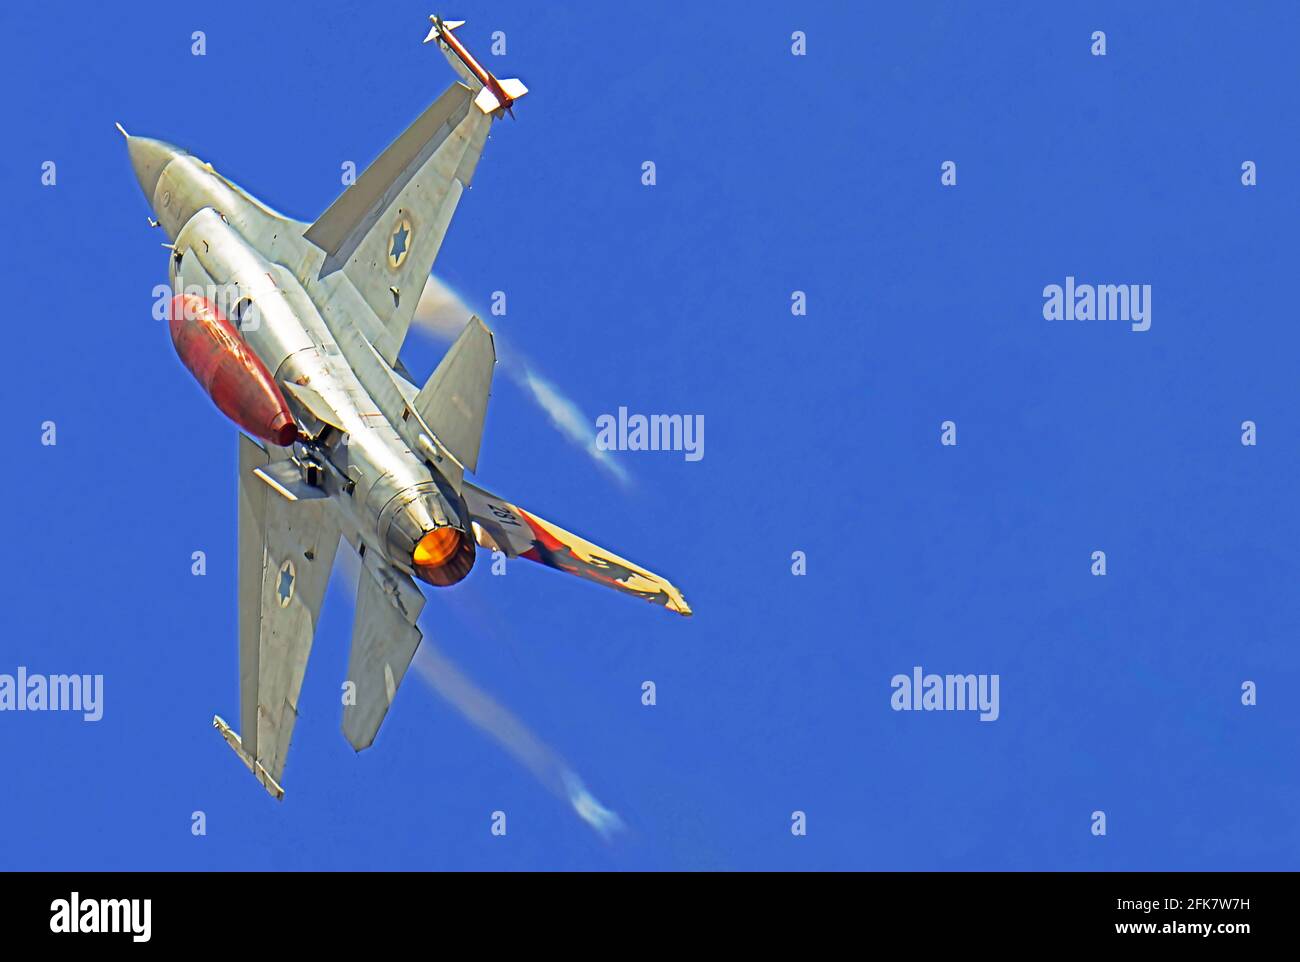 Israeli Air Force (IAF) General Dynamics F-16 in flight with a blue sky background. Stock Photo